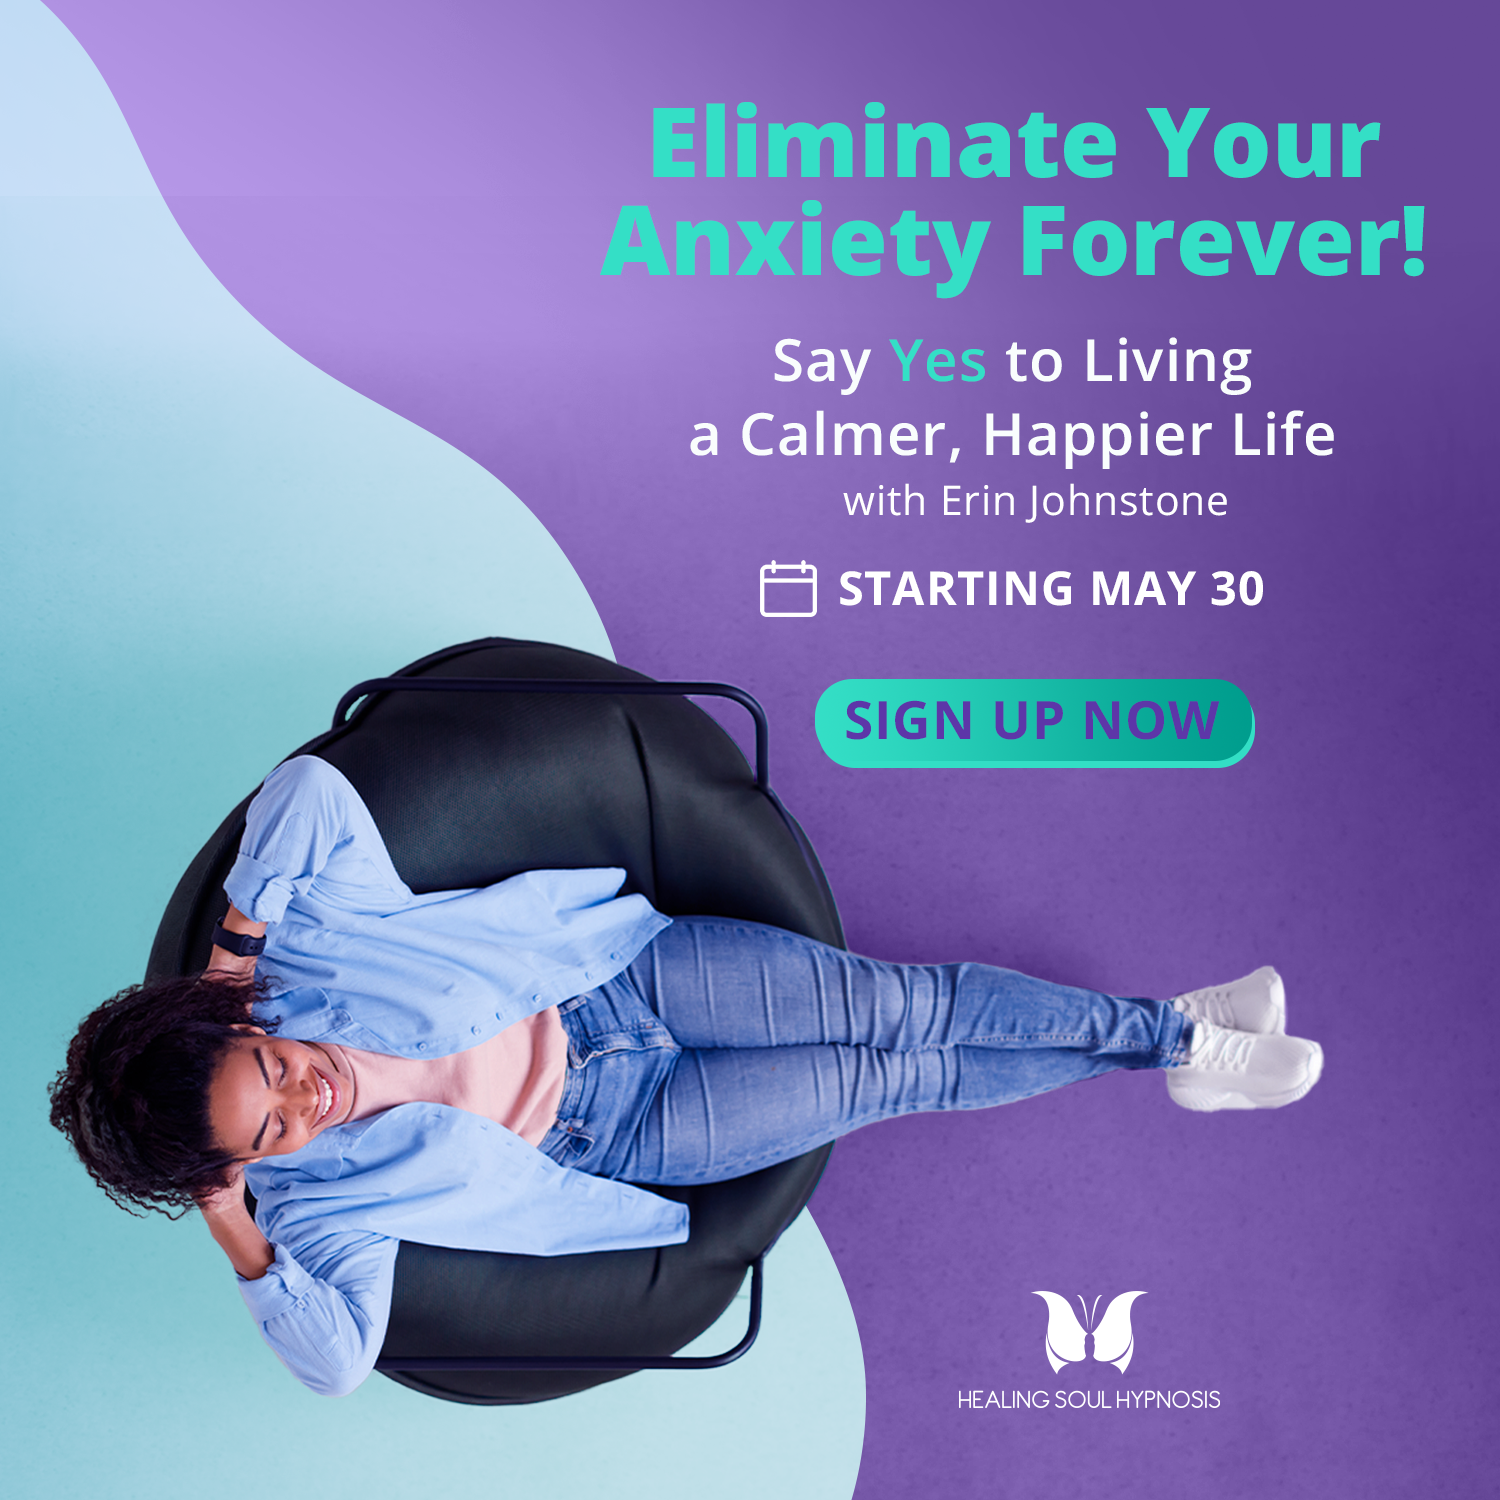 Eliminate Your Anxiety with Erin Johnstone